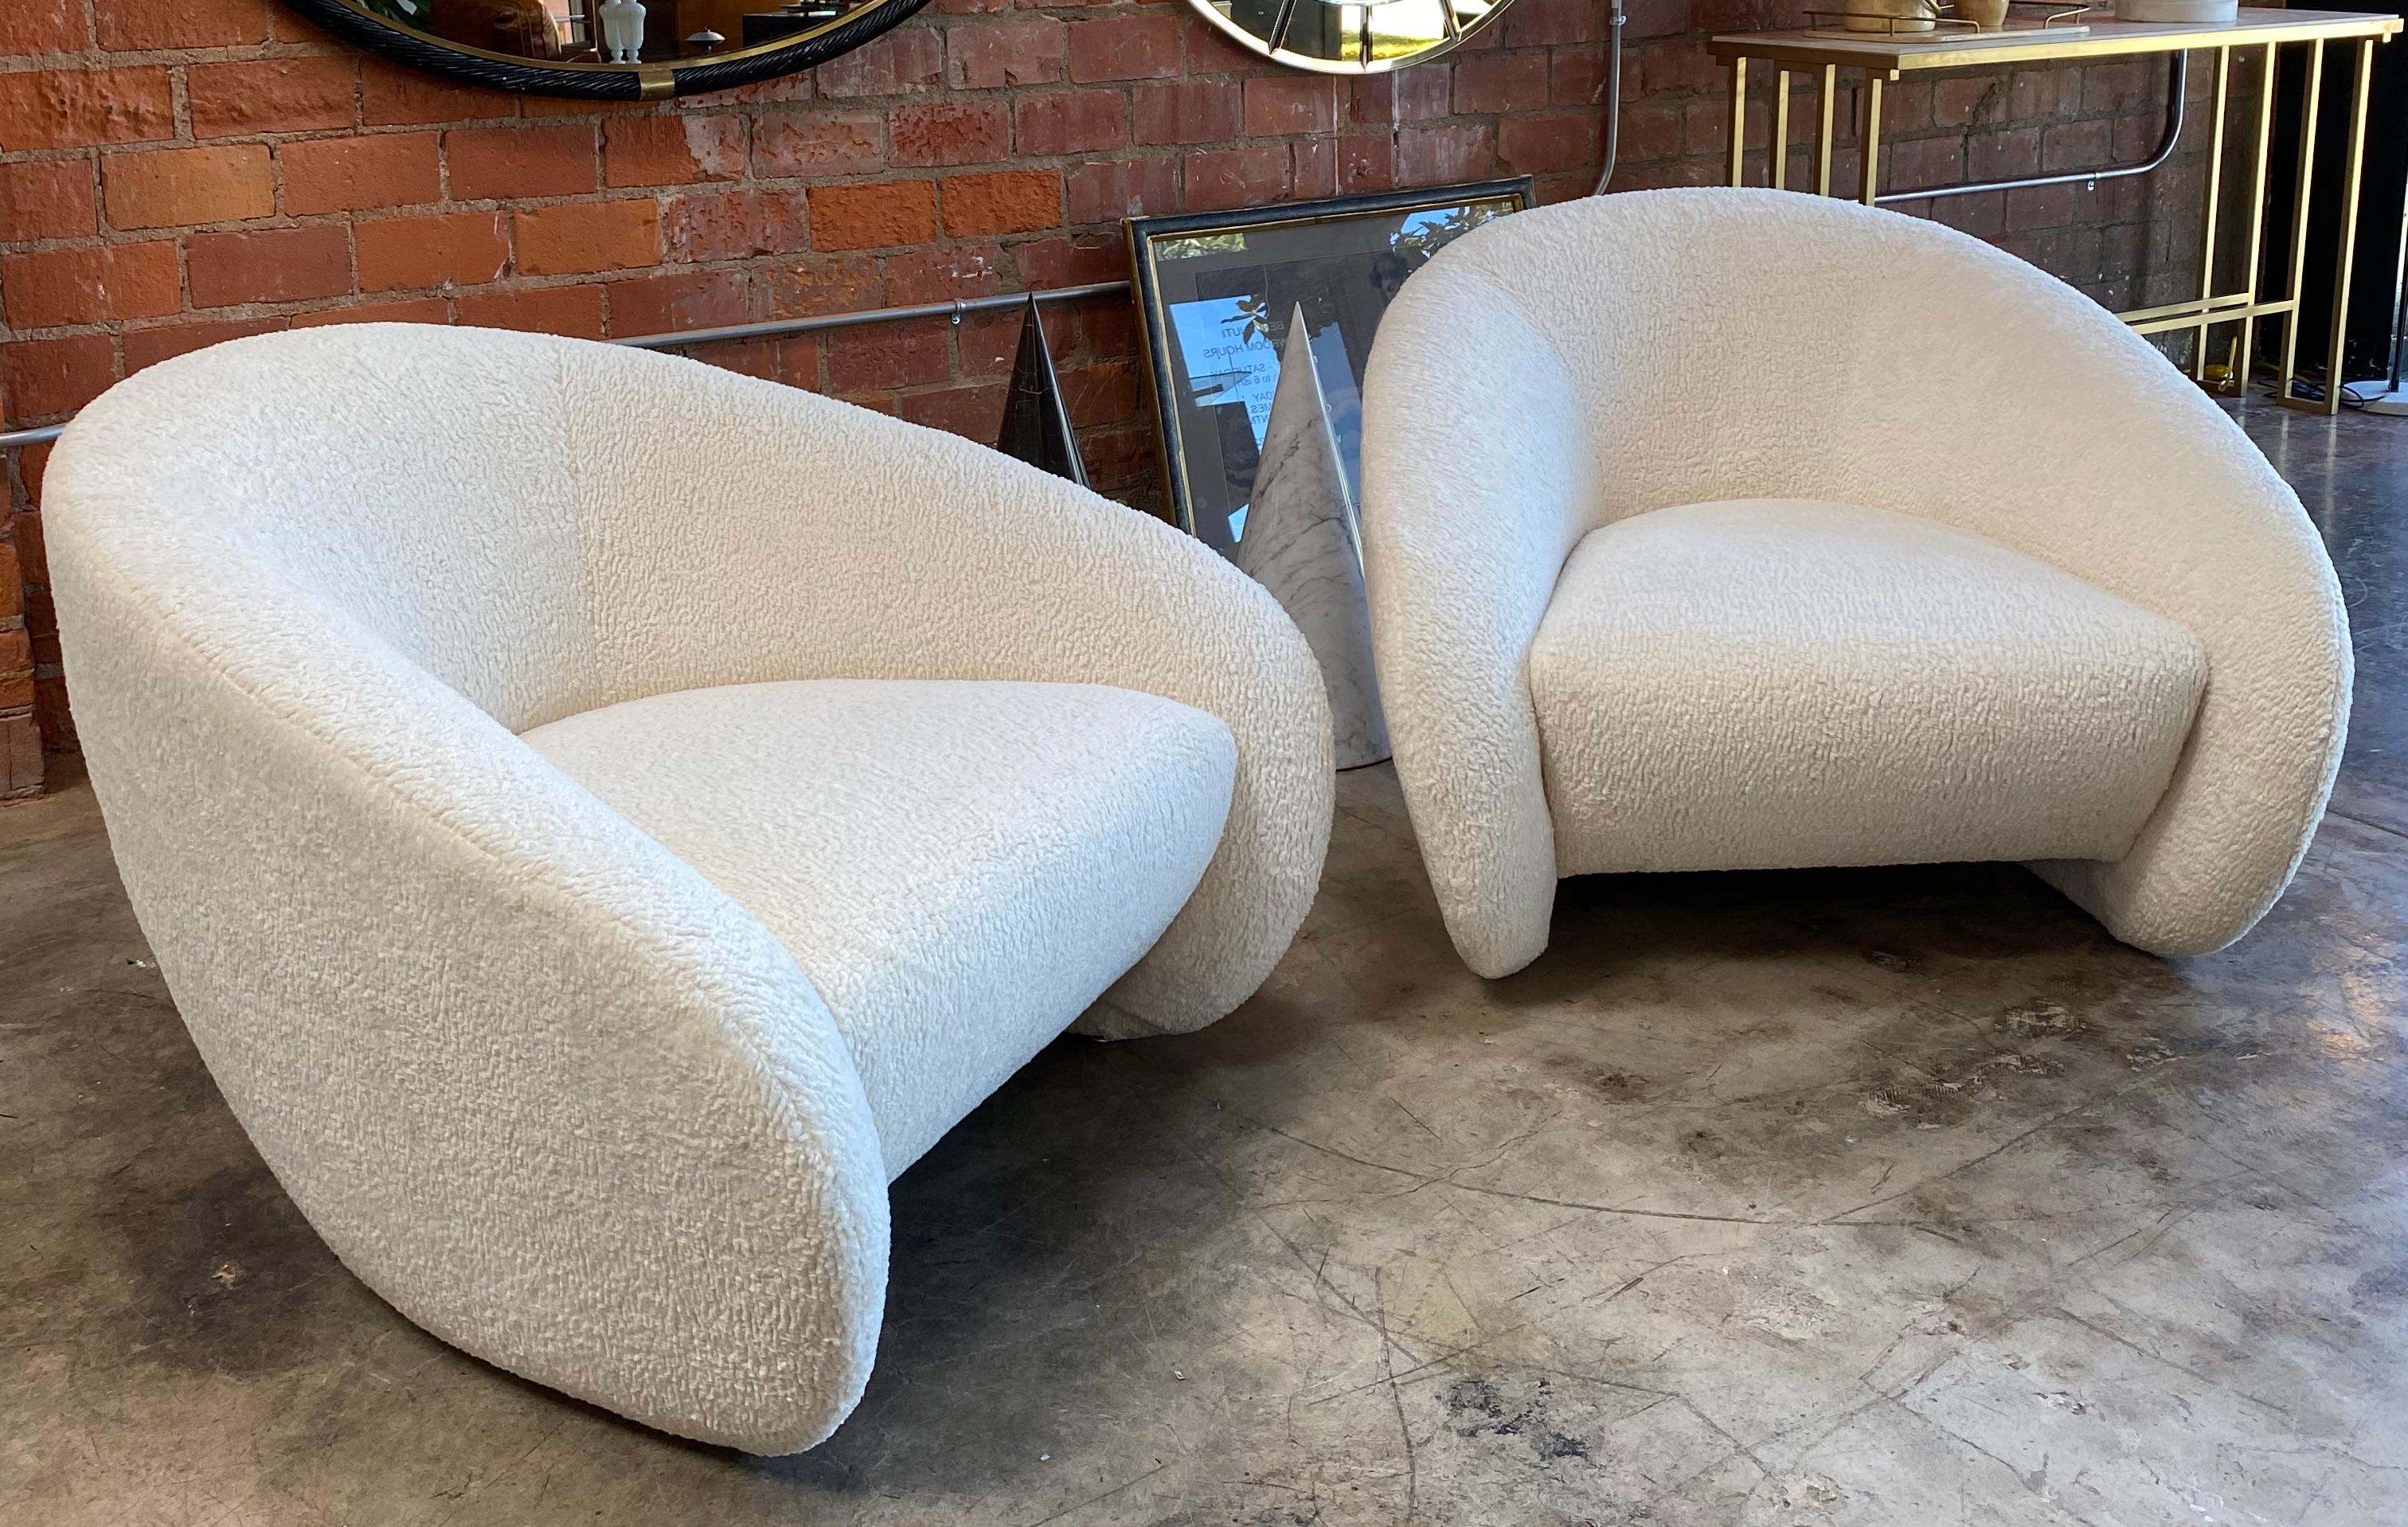 Wonderful pair of 2 Italian armchairs by IPE Cavalli in a white sheep fabric.

At Zola Predosa (Bologna), the historic Italian company IPE was found by the brothers Carlo, Pompeo and Vittorio Cavalli. Their entrepreneurial adventure in the world